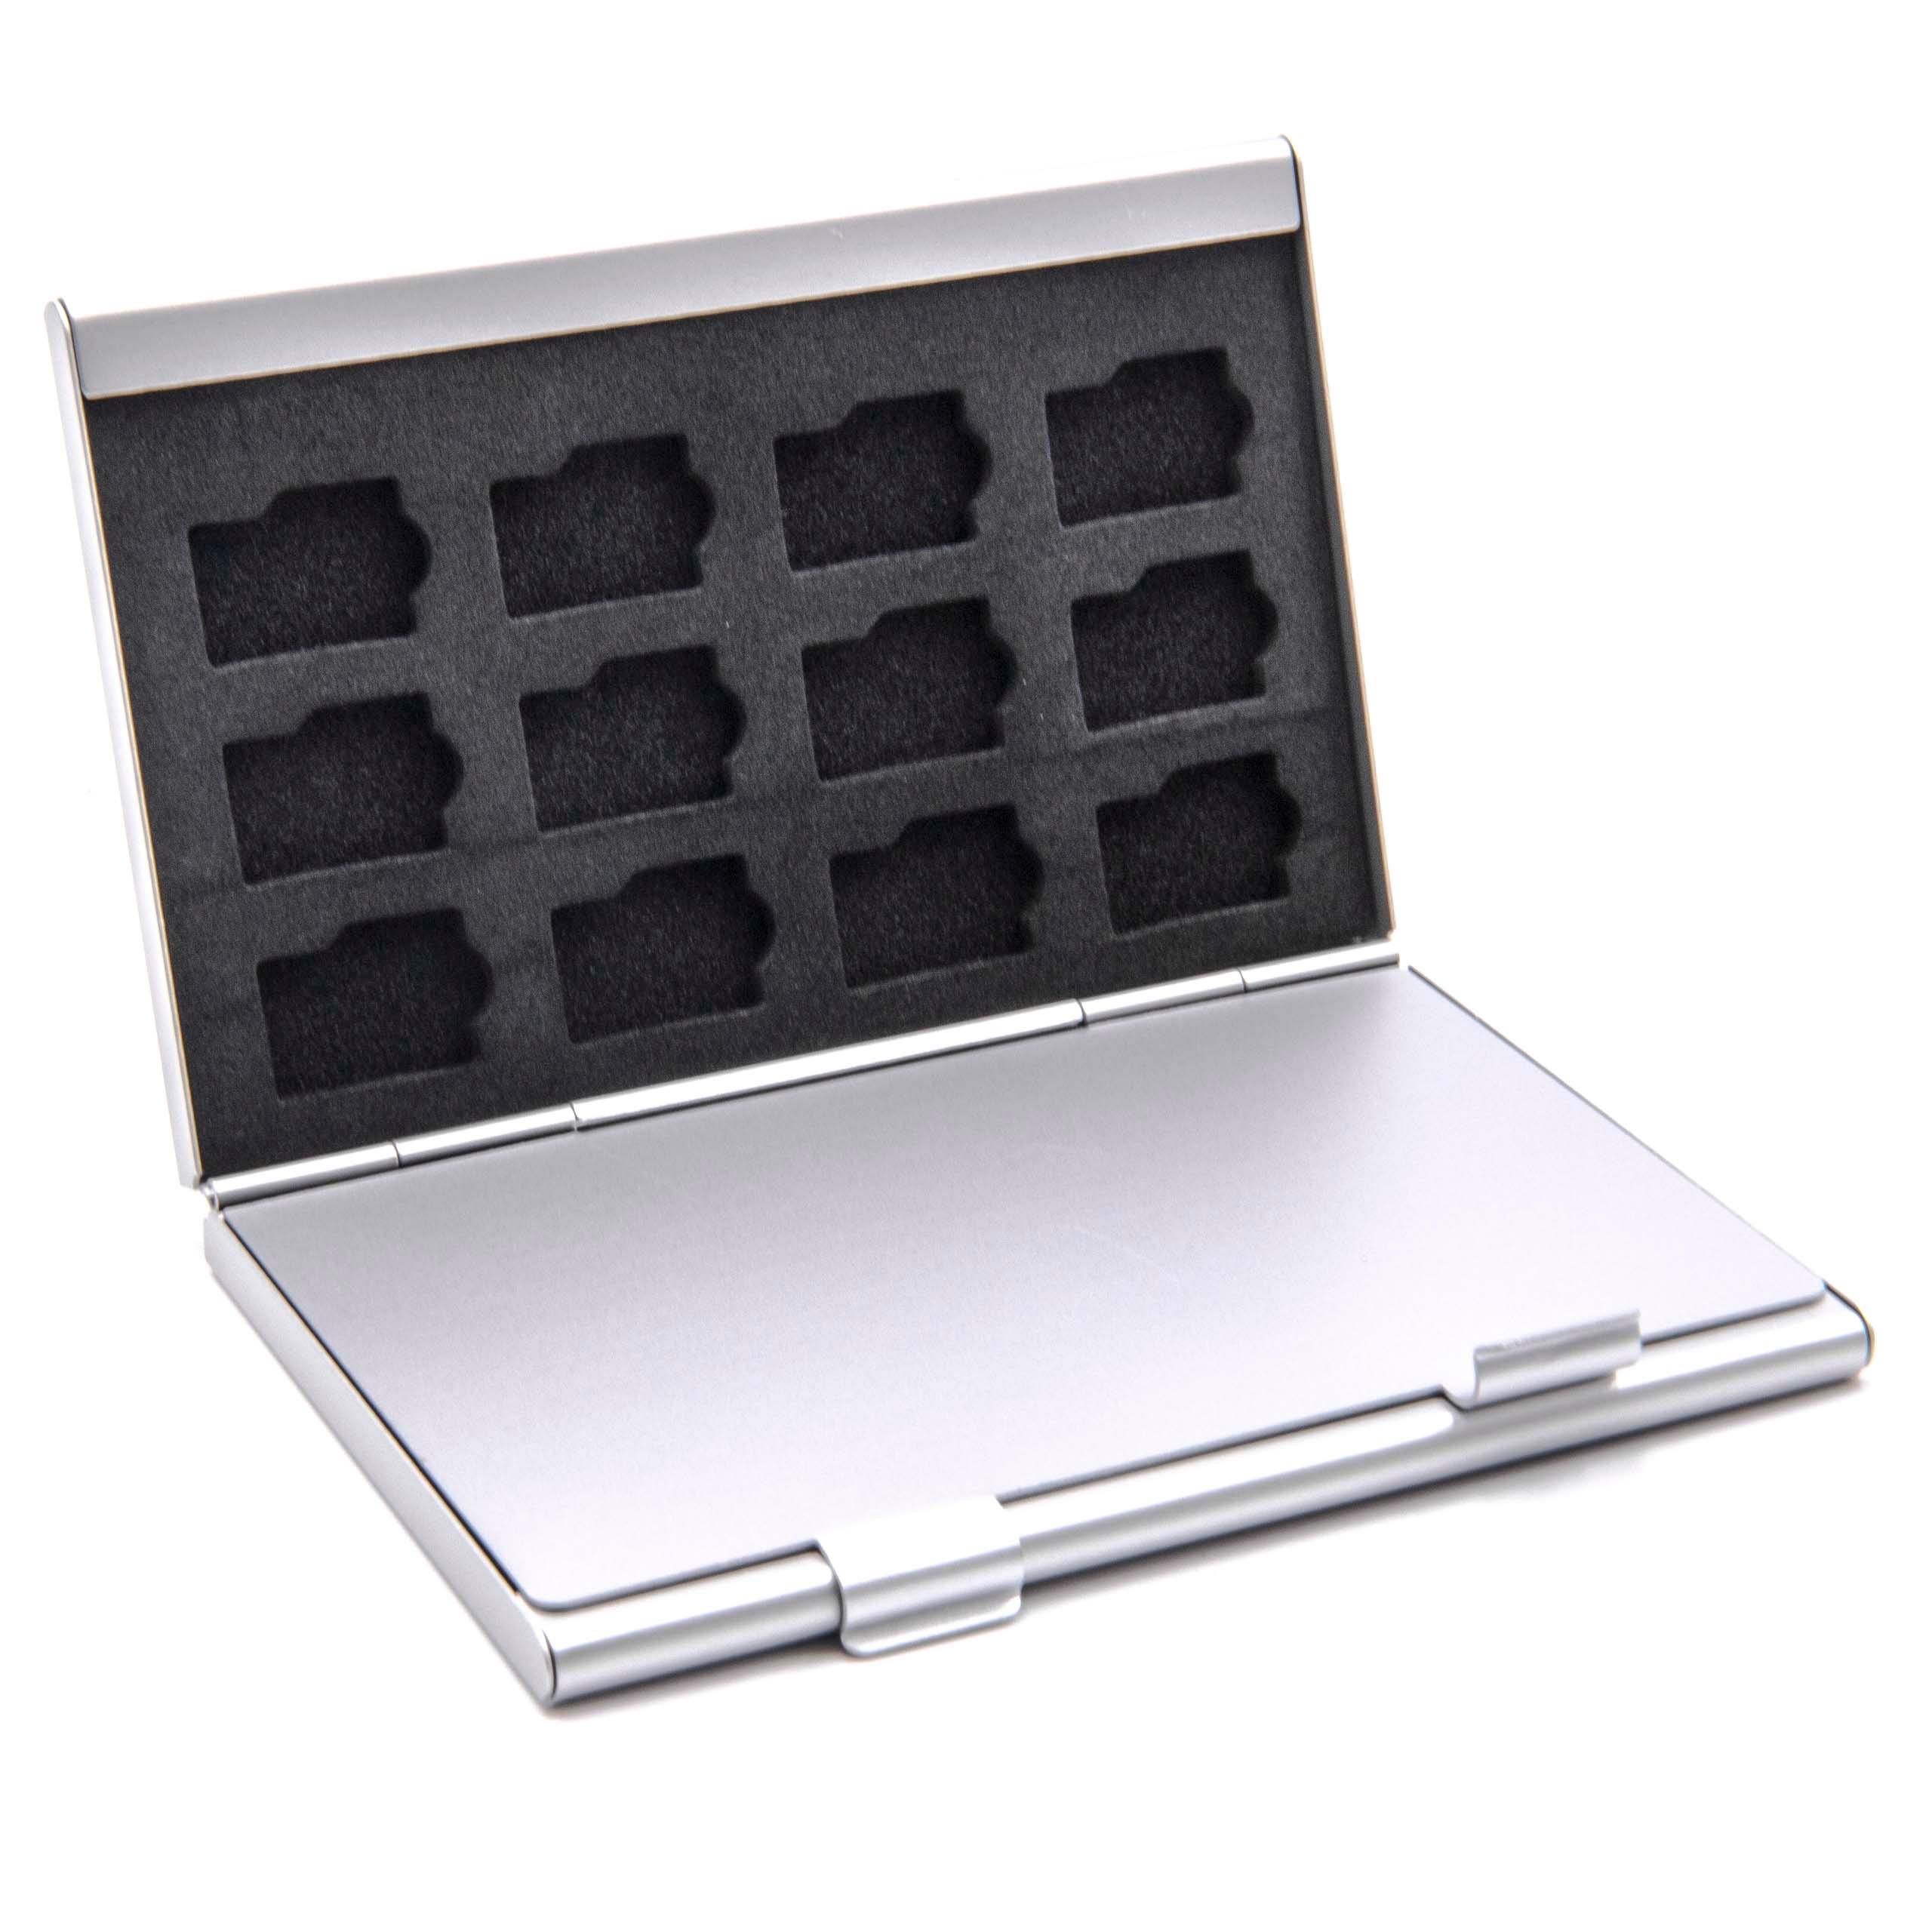 Carrying Case suitable for memory cards 24x MicroSD - aluminium, silver